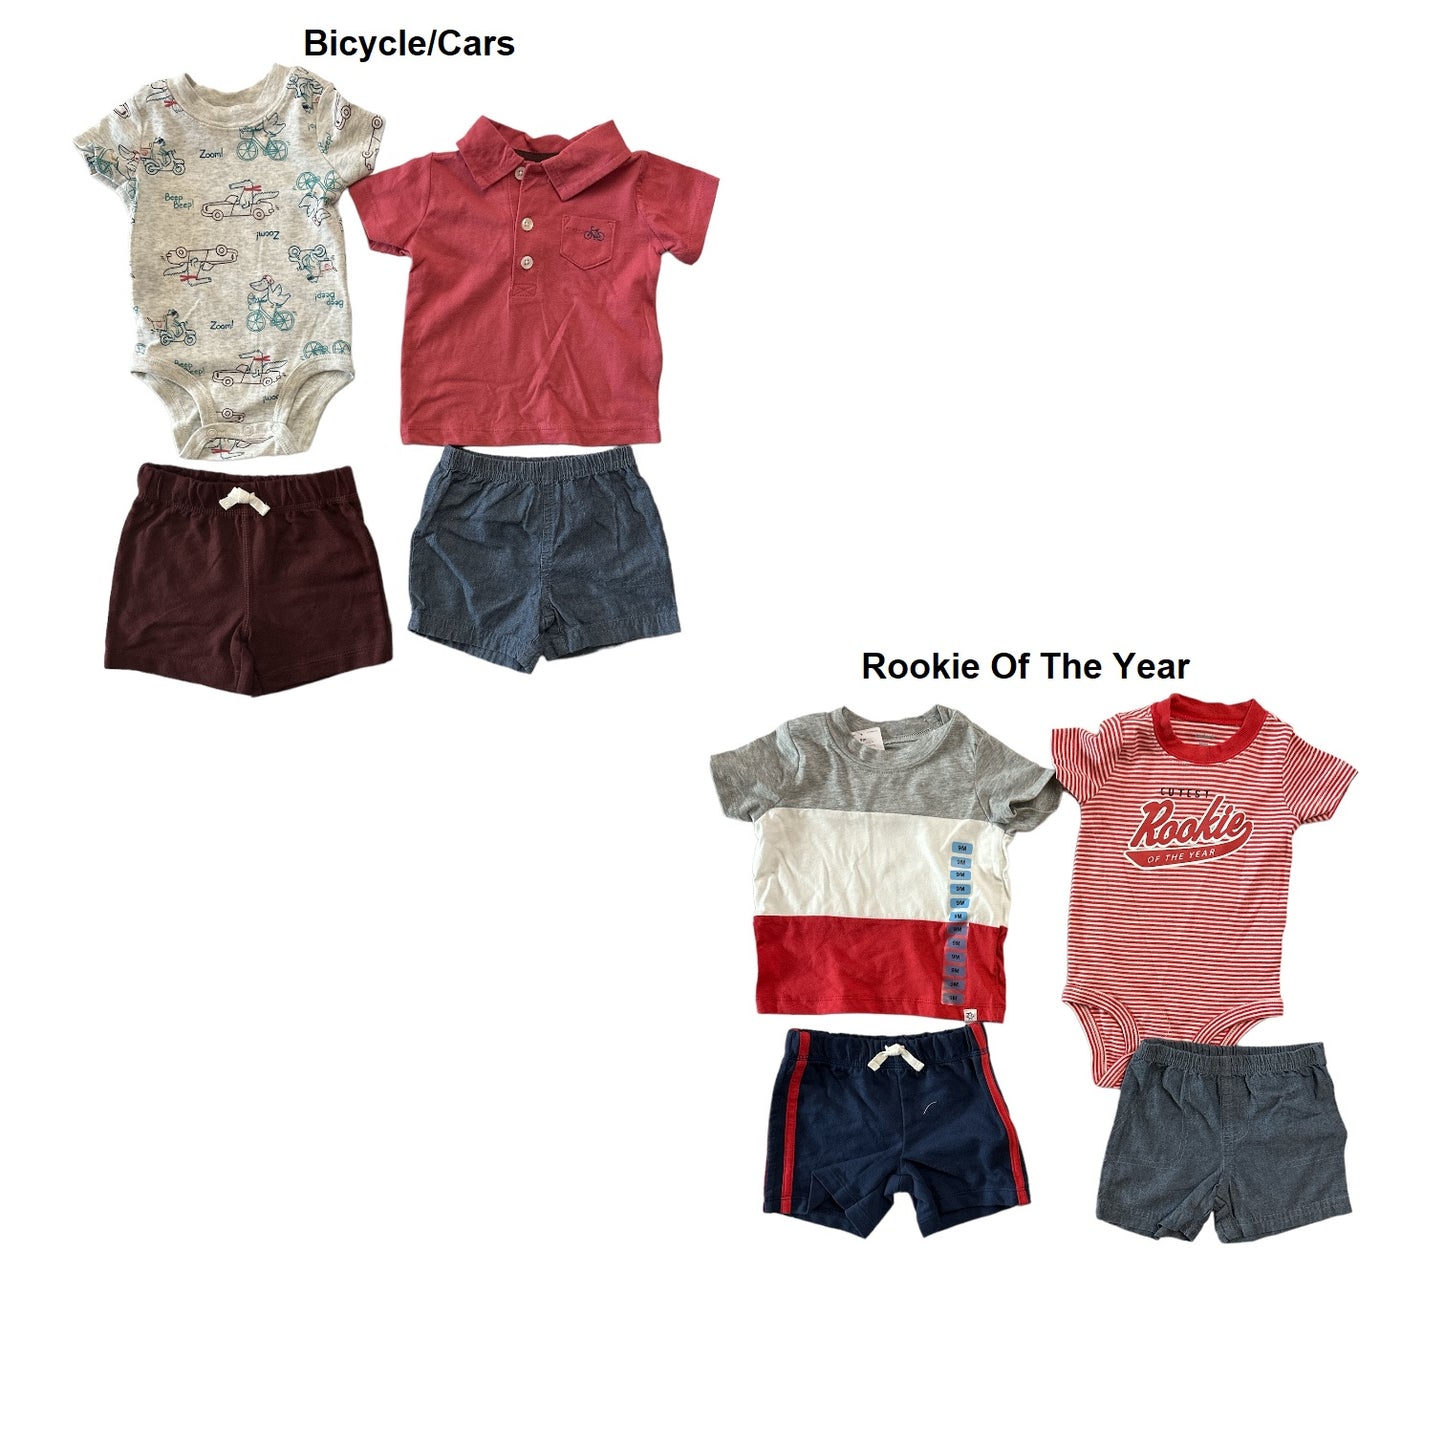 Carter's Baby Boy's 4 Piece Short Sleeve Shirts & Shorts Outfit Sets